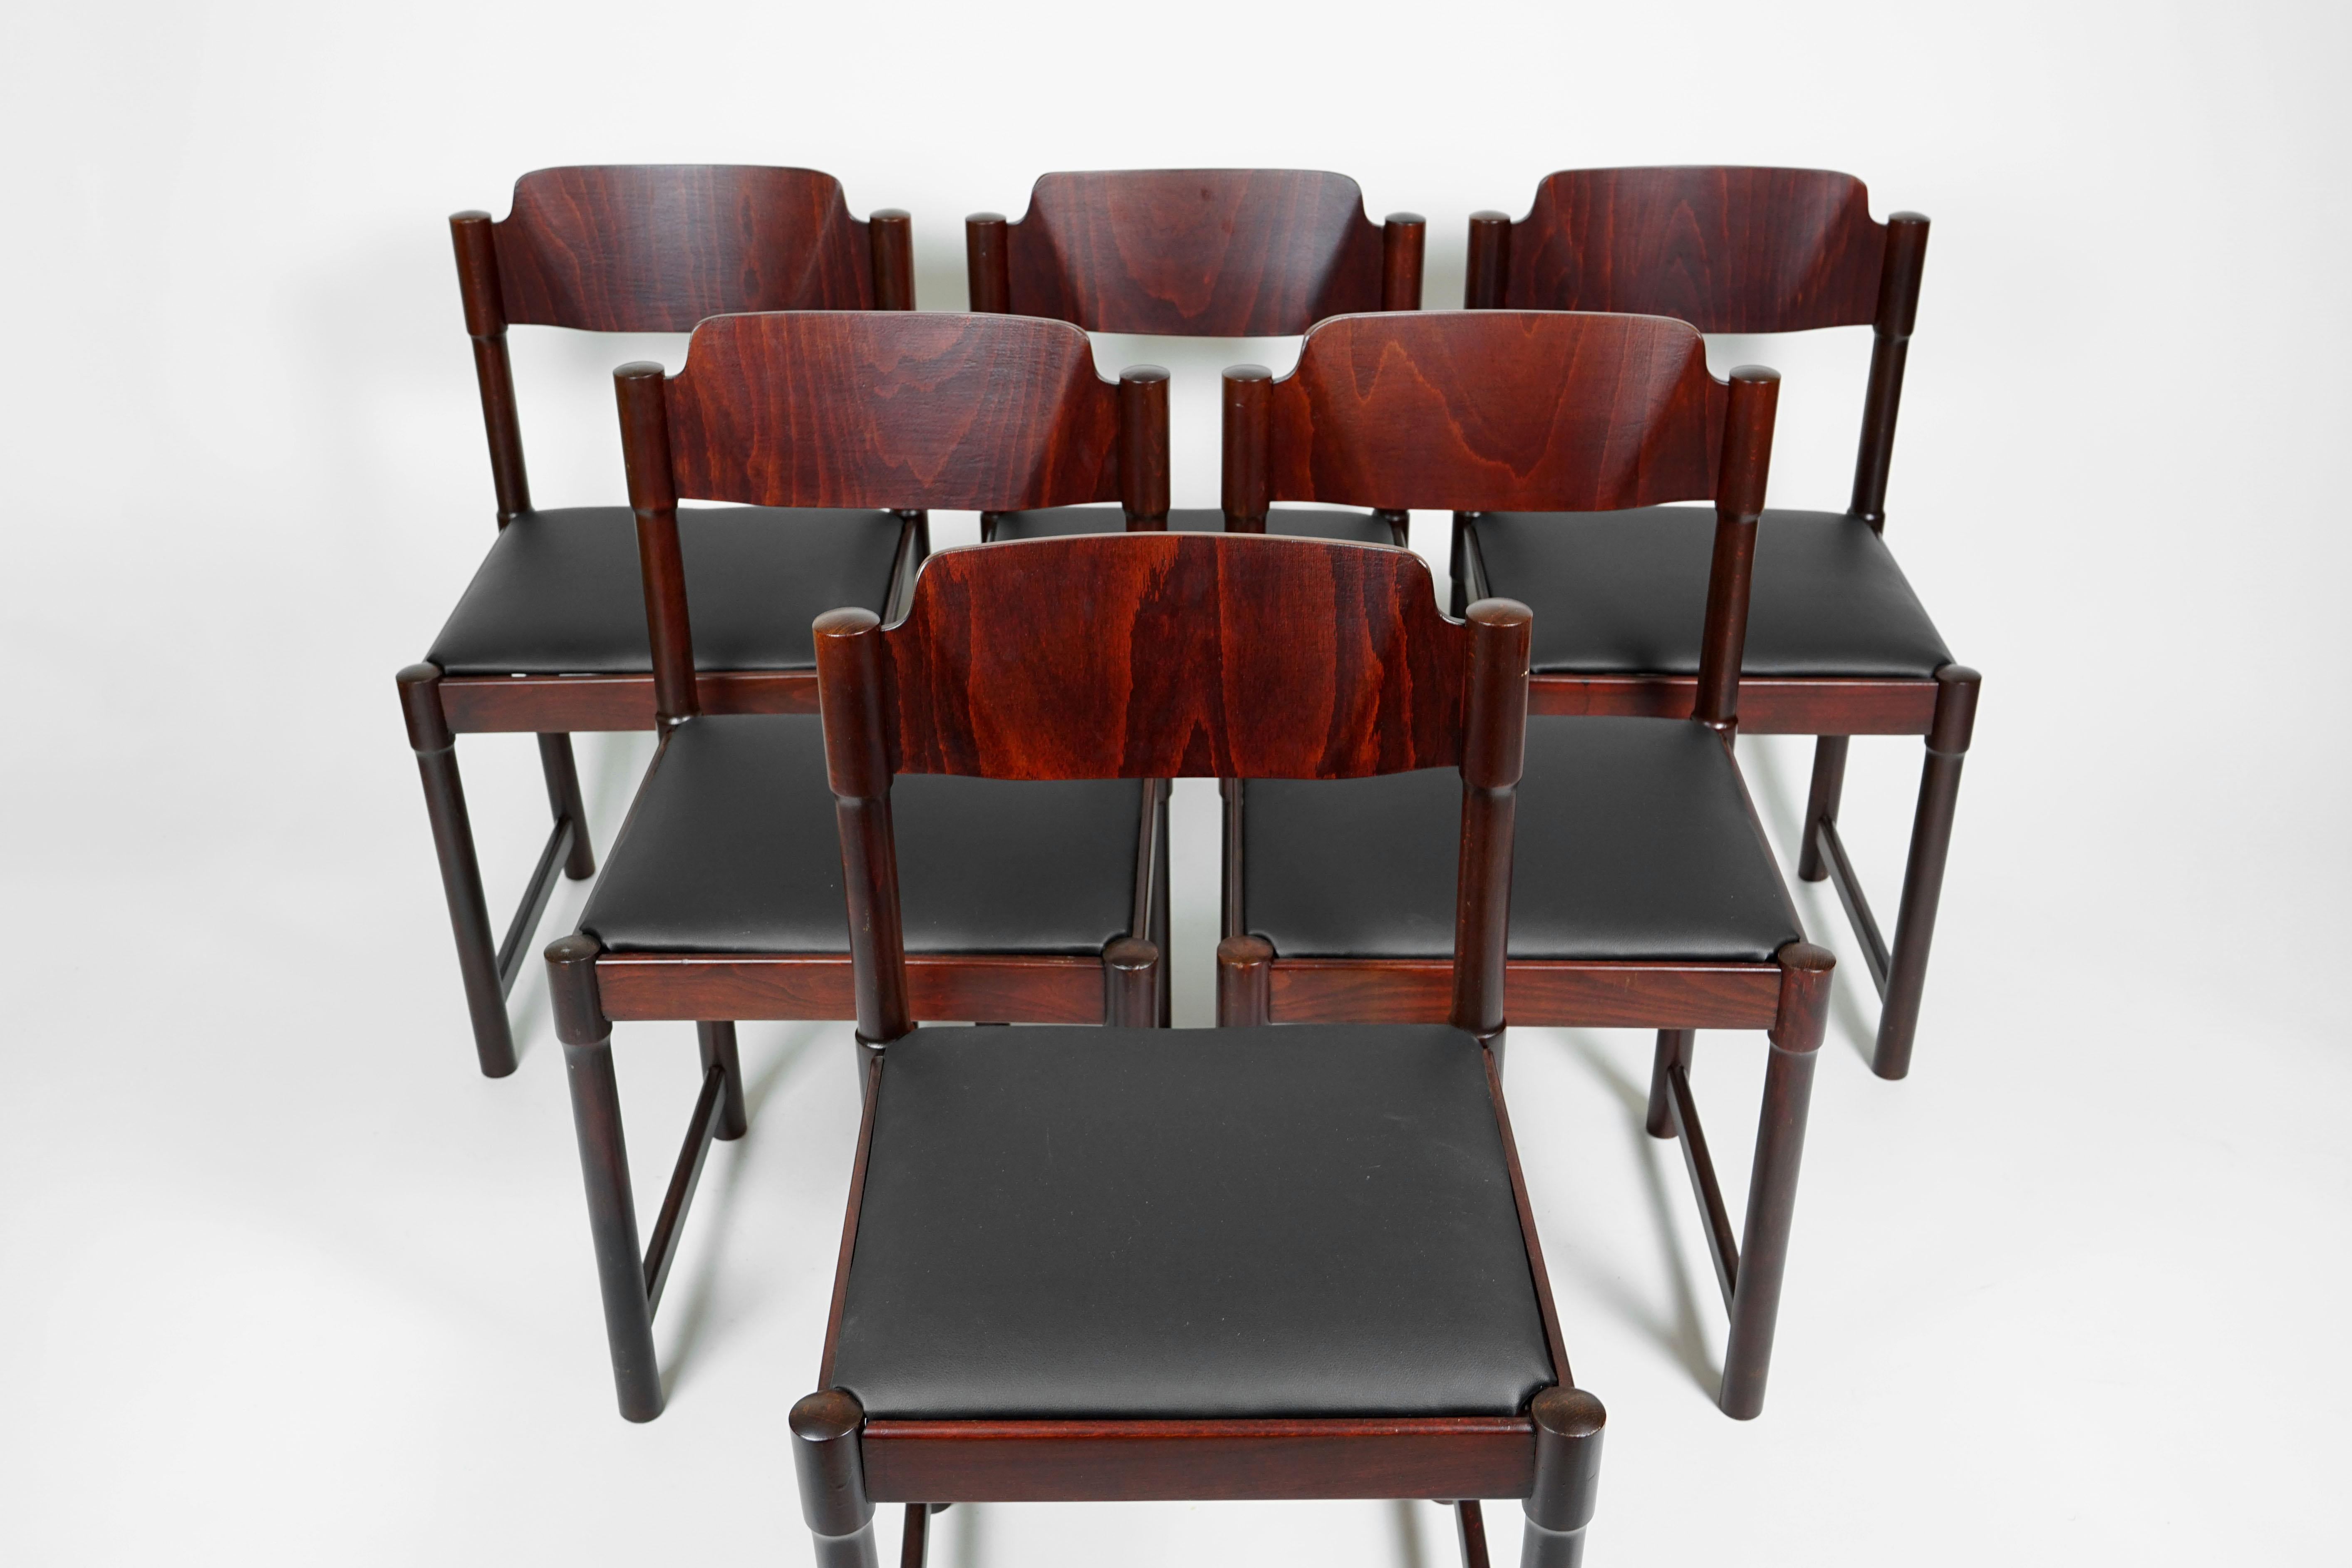 Set of six extraordinary and unique dining room chairs, of Czechoslovakian designer Antonin Suman. Produced in the 1970s.

The chairs are totally restored and mahogany stained. The seating is refurbished with a black high-quality artificial